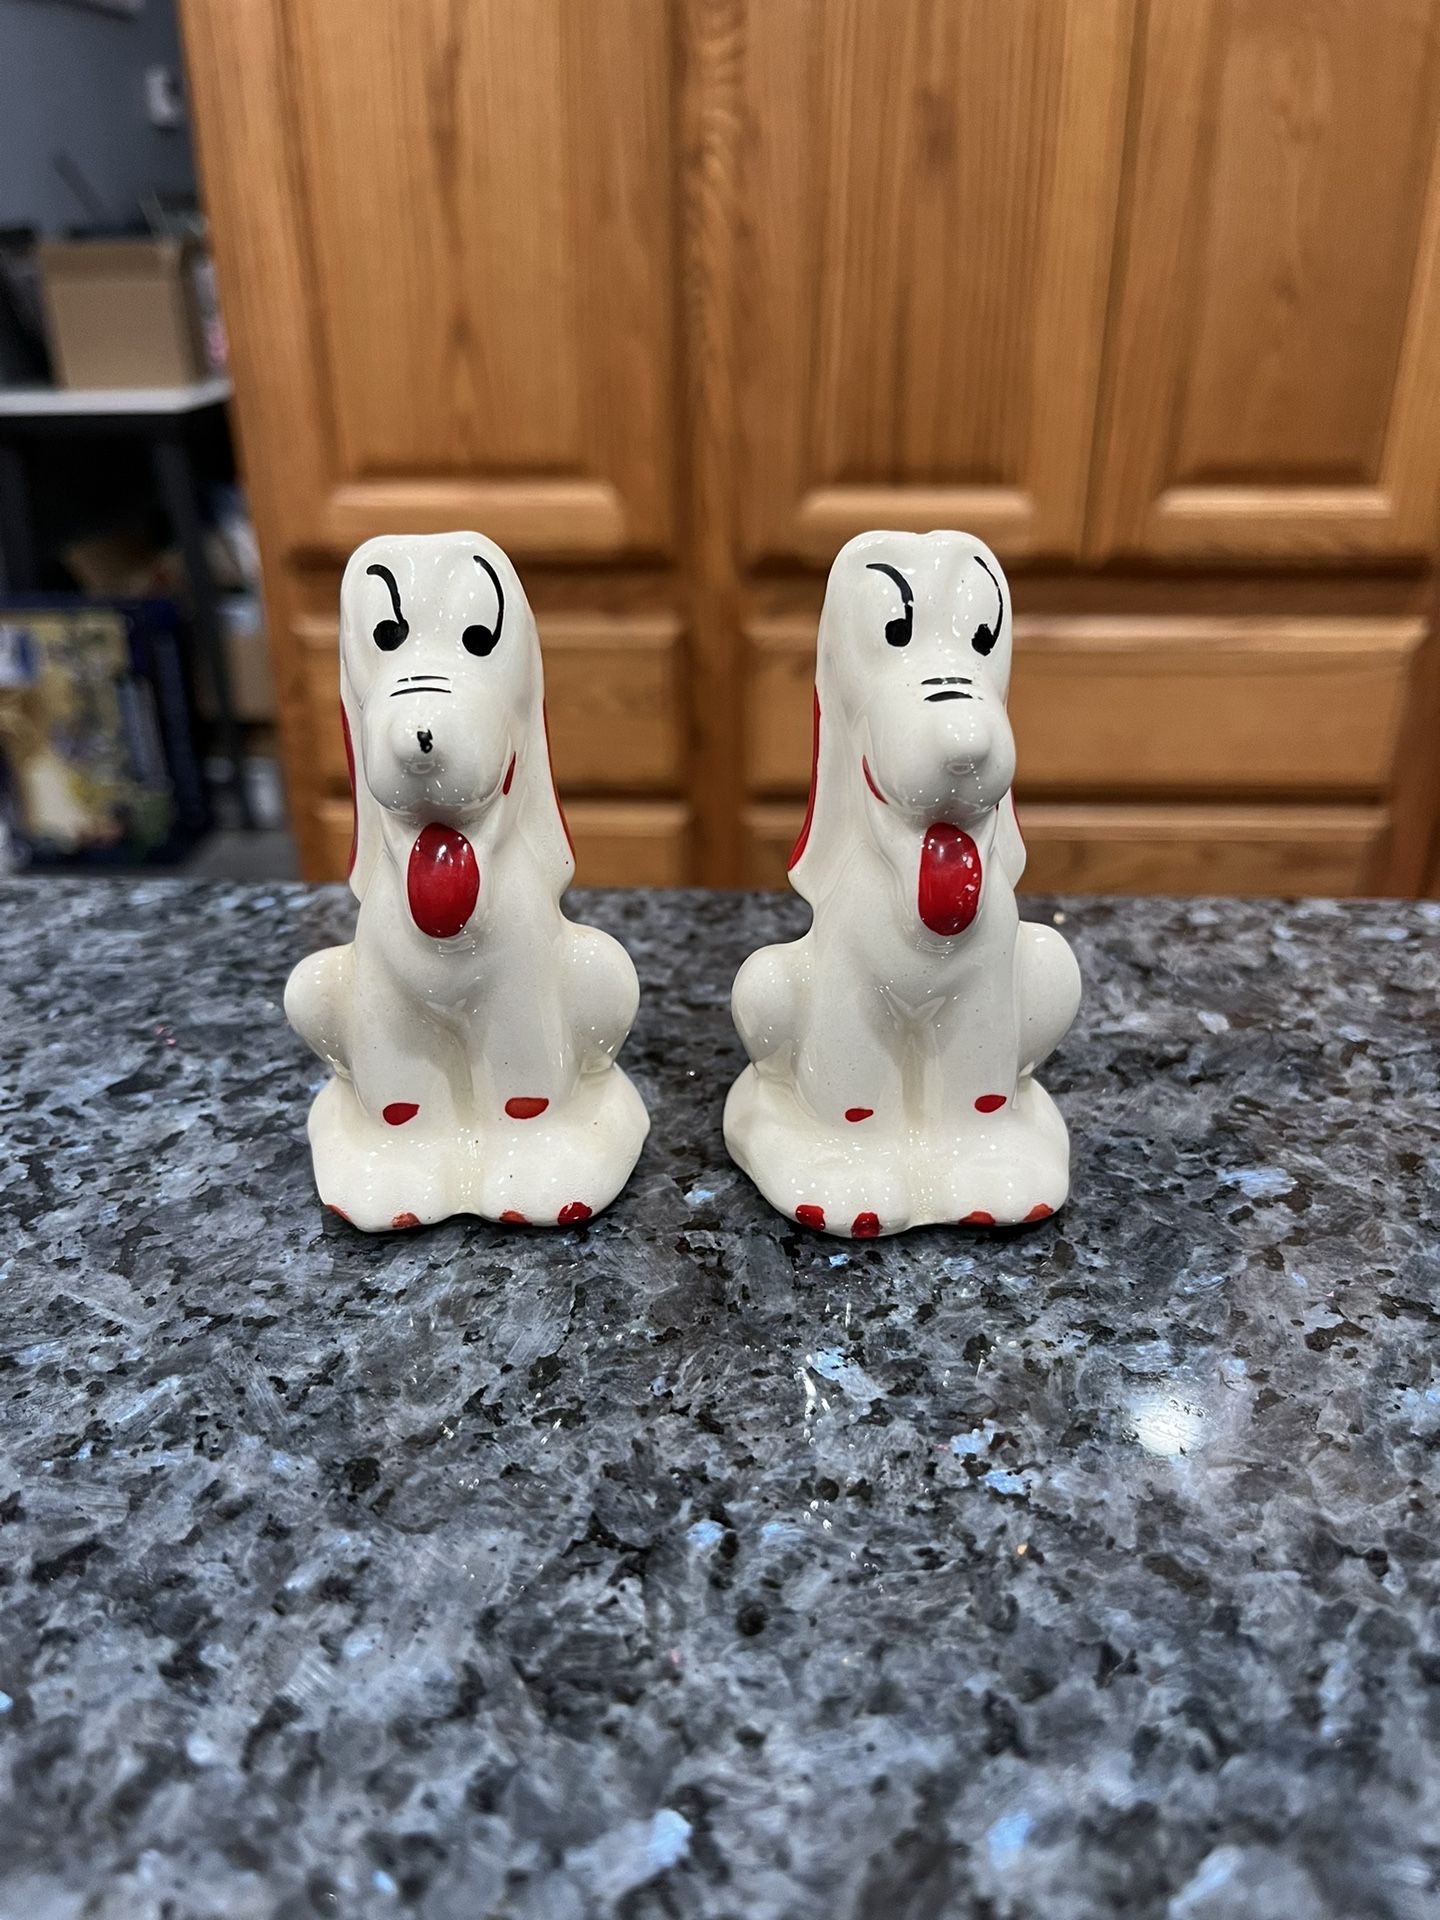 Vintage White Dogs With Red And Black Accent Pair of Salt And Pepper Shakers.  Preowned With Original Cork Stoppers 